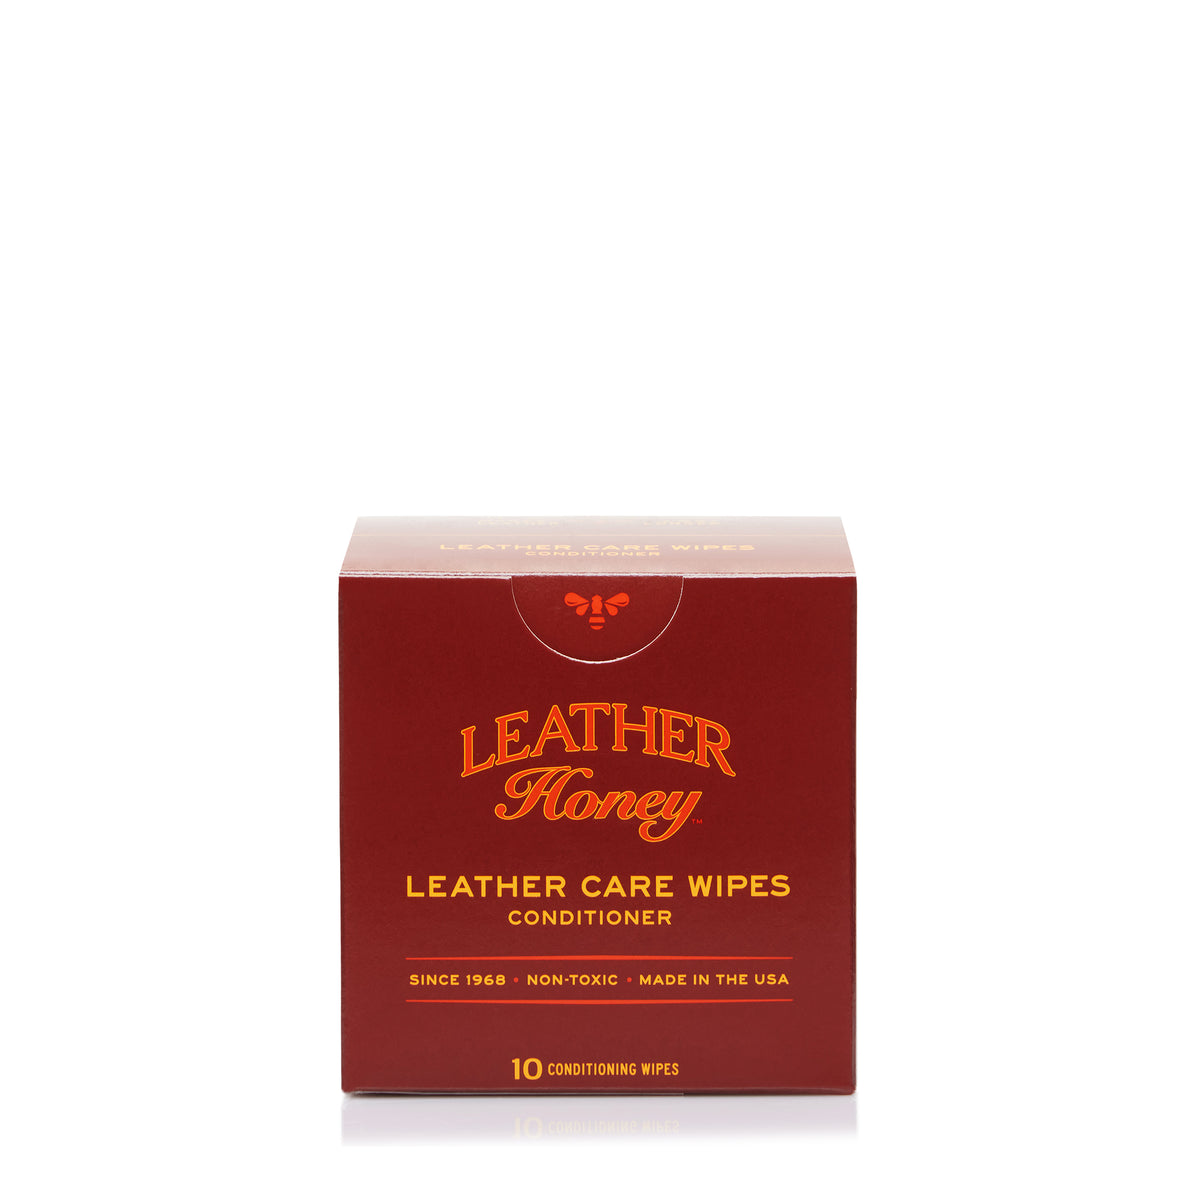 Leather Care Wipes (10 Pack)